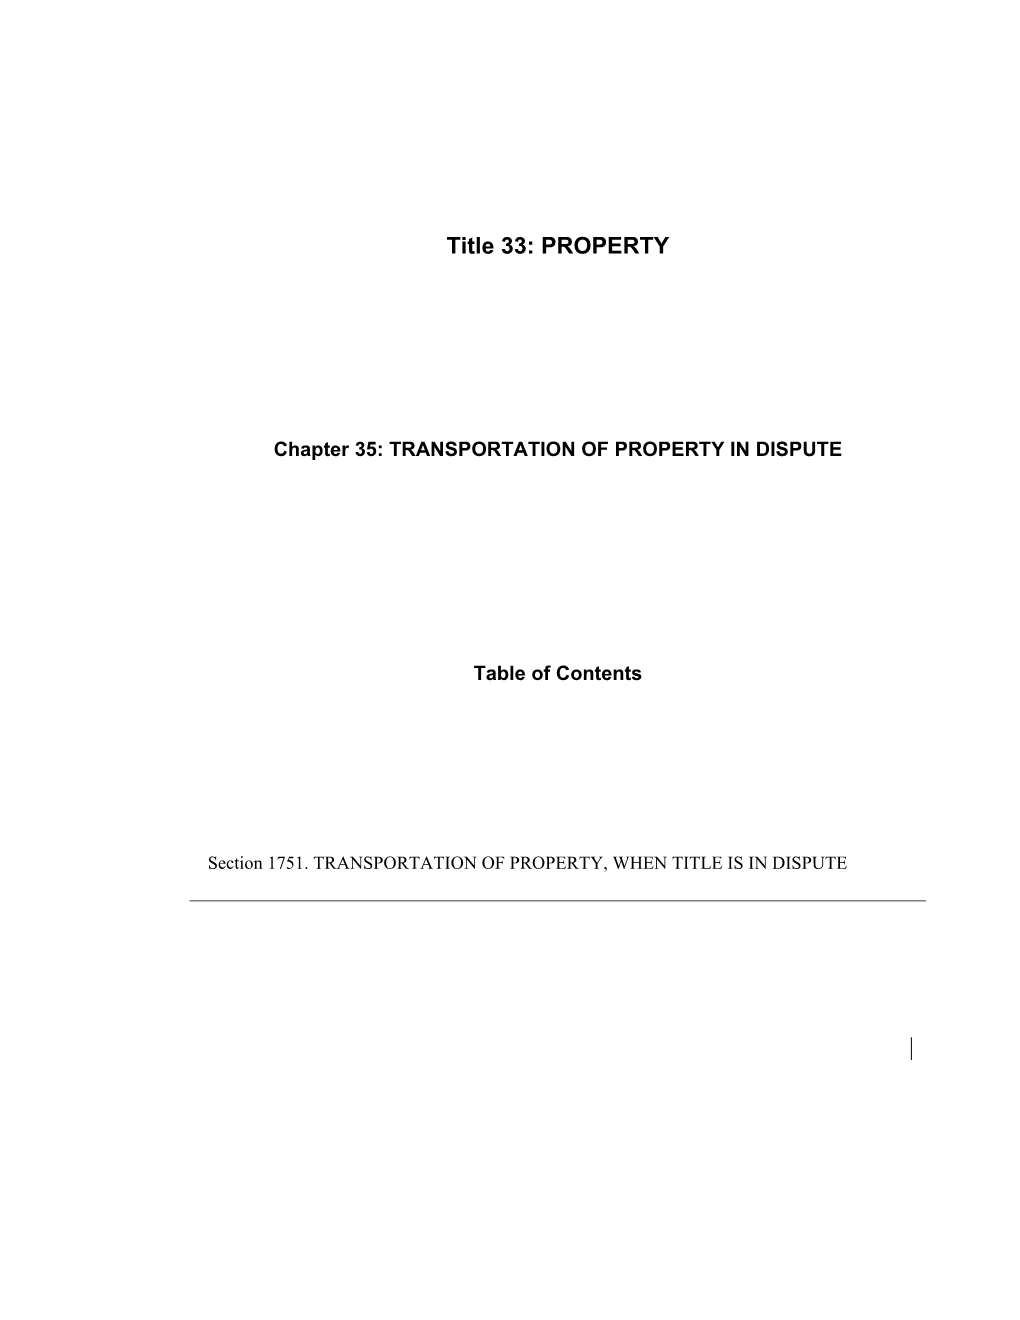 MRS Title 33, Chapter 35: TRANSPORTATION of PROPERTY in DISPUTE